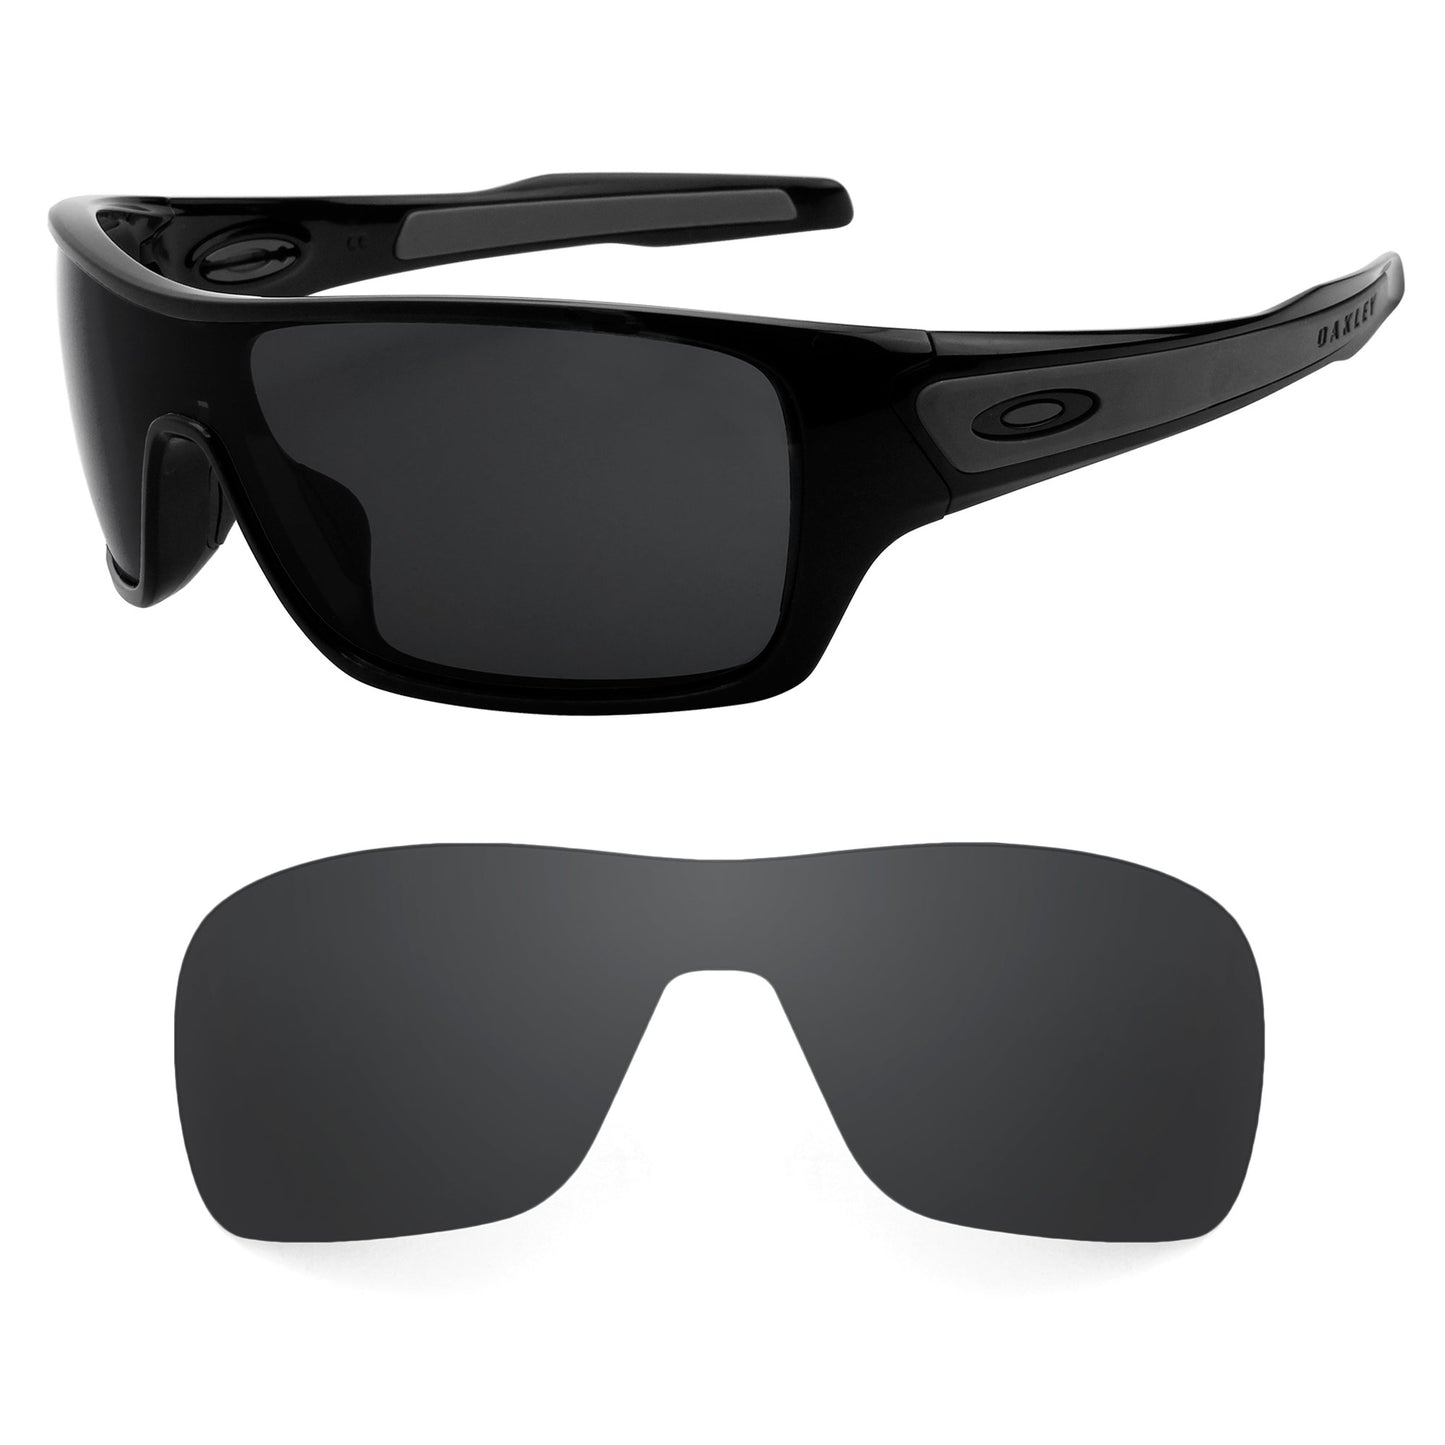 Oakley Turbine Rotor sunglasses with replacement lenses